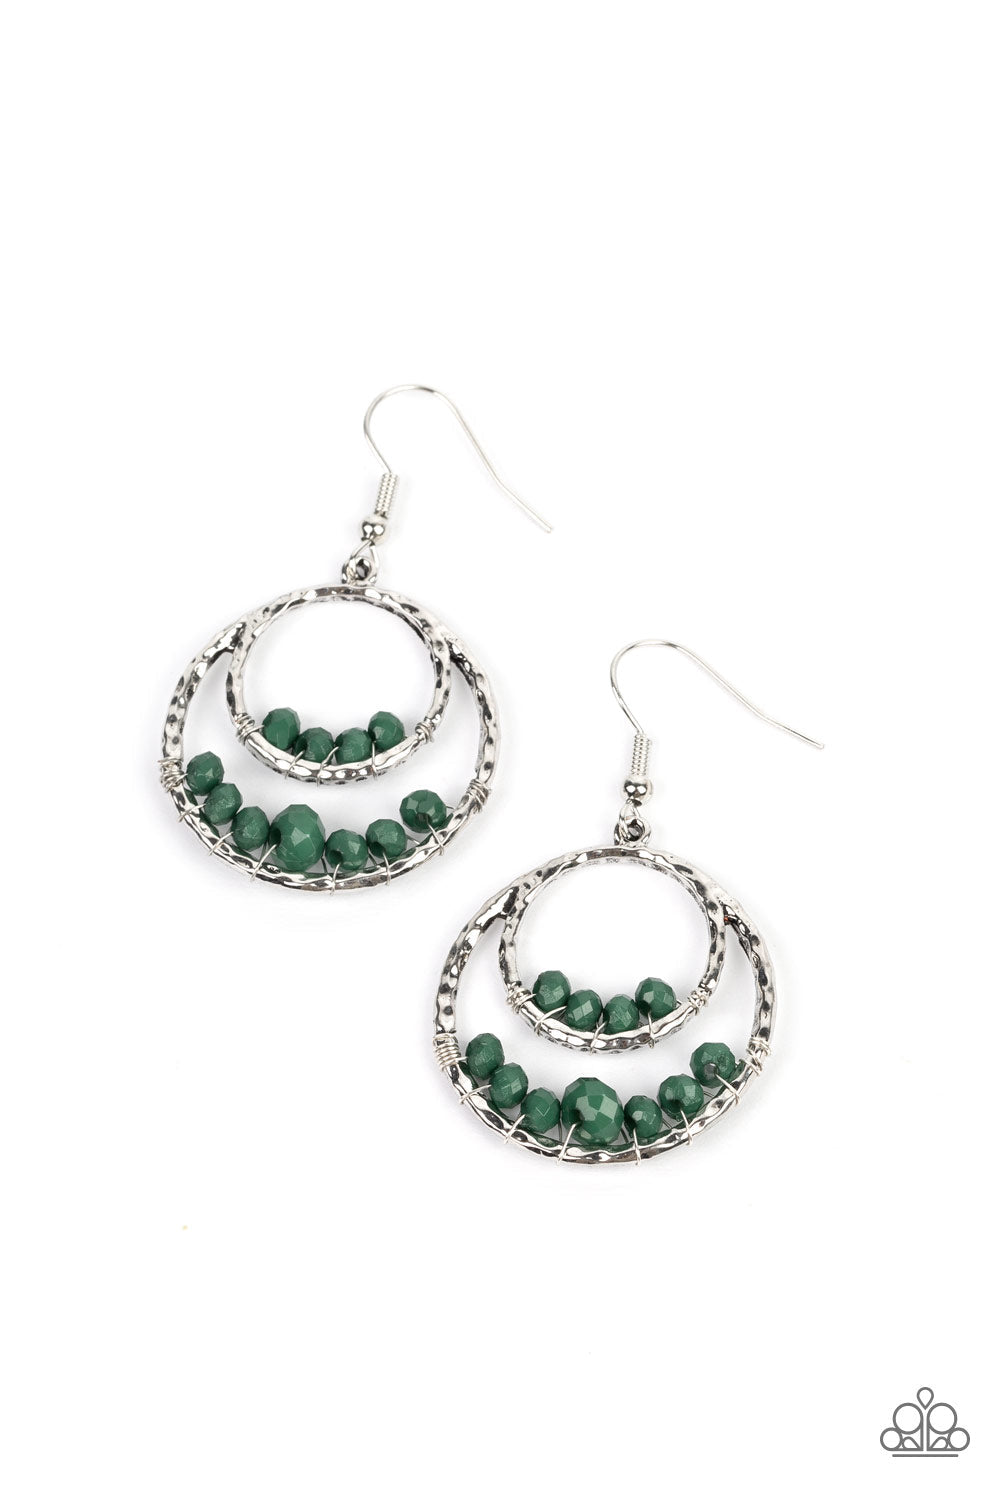 Bustling Beads - Green Beads & Overlapping Silver Circle Paparazzi Earrings